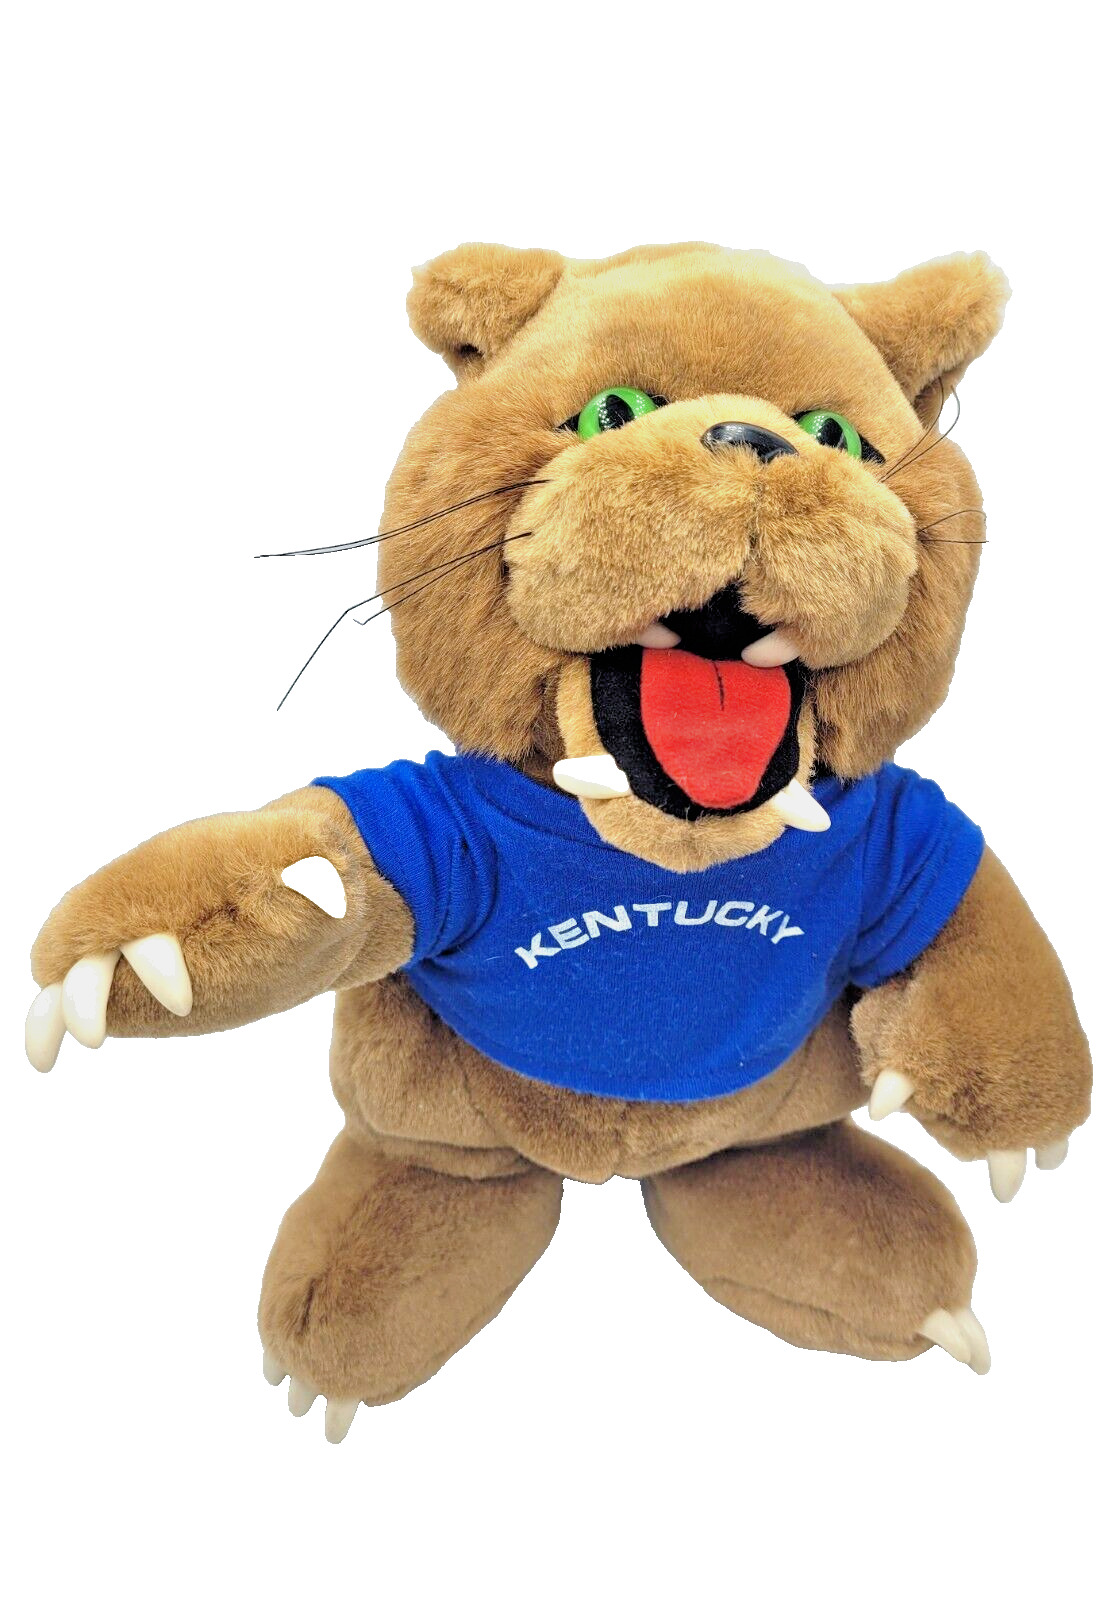 Vintage 1980s Kentucky Wildcat Plush Mascot with Rubber Paws & Teeth - Rare Find